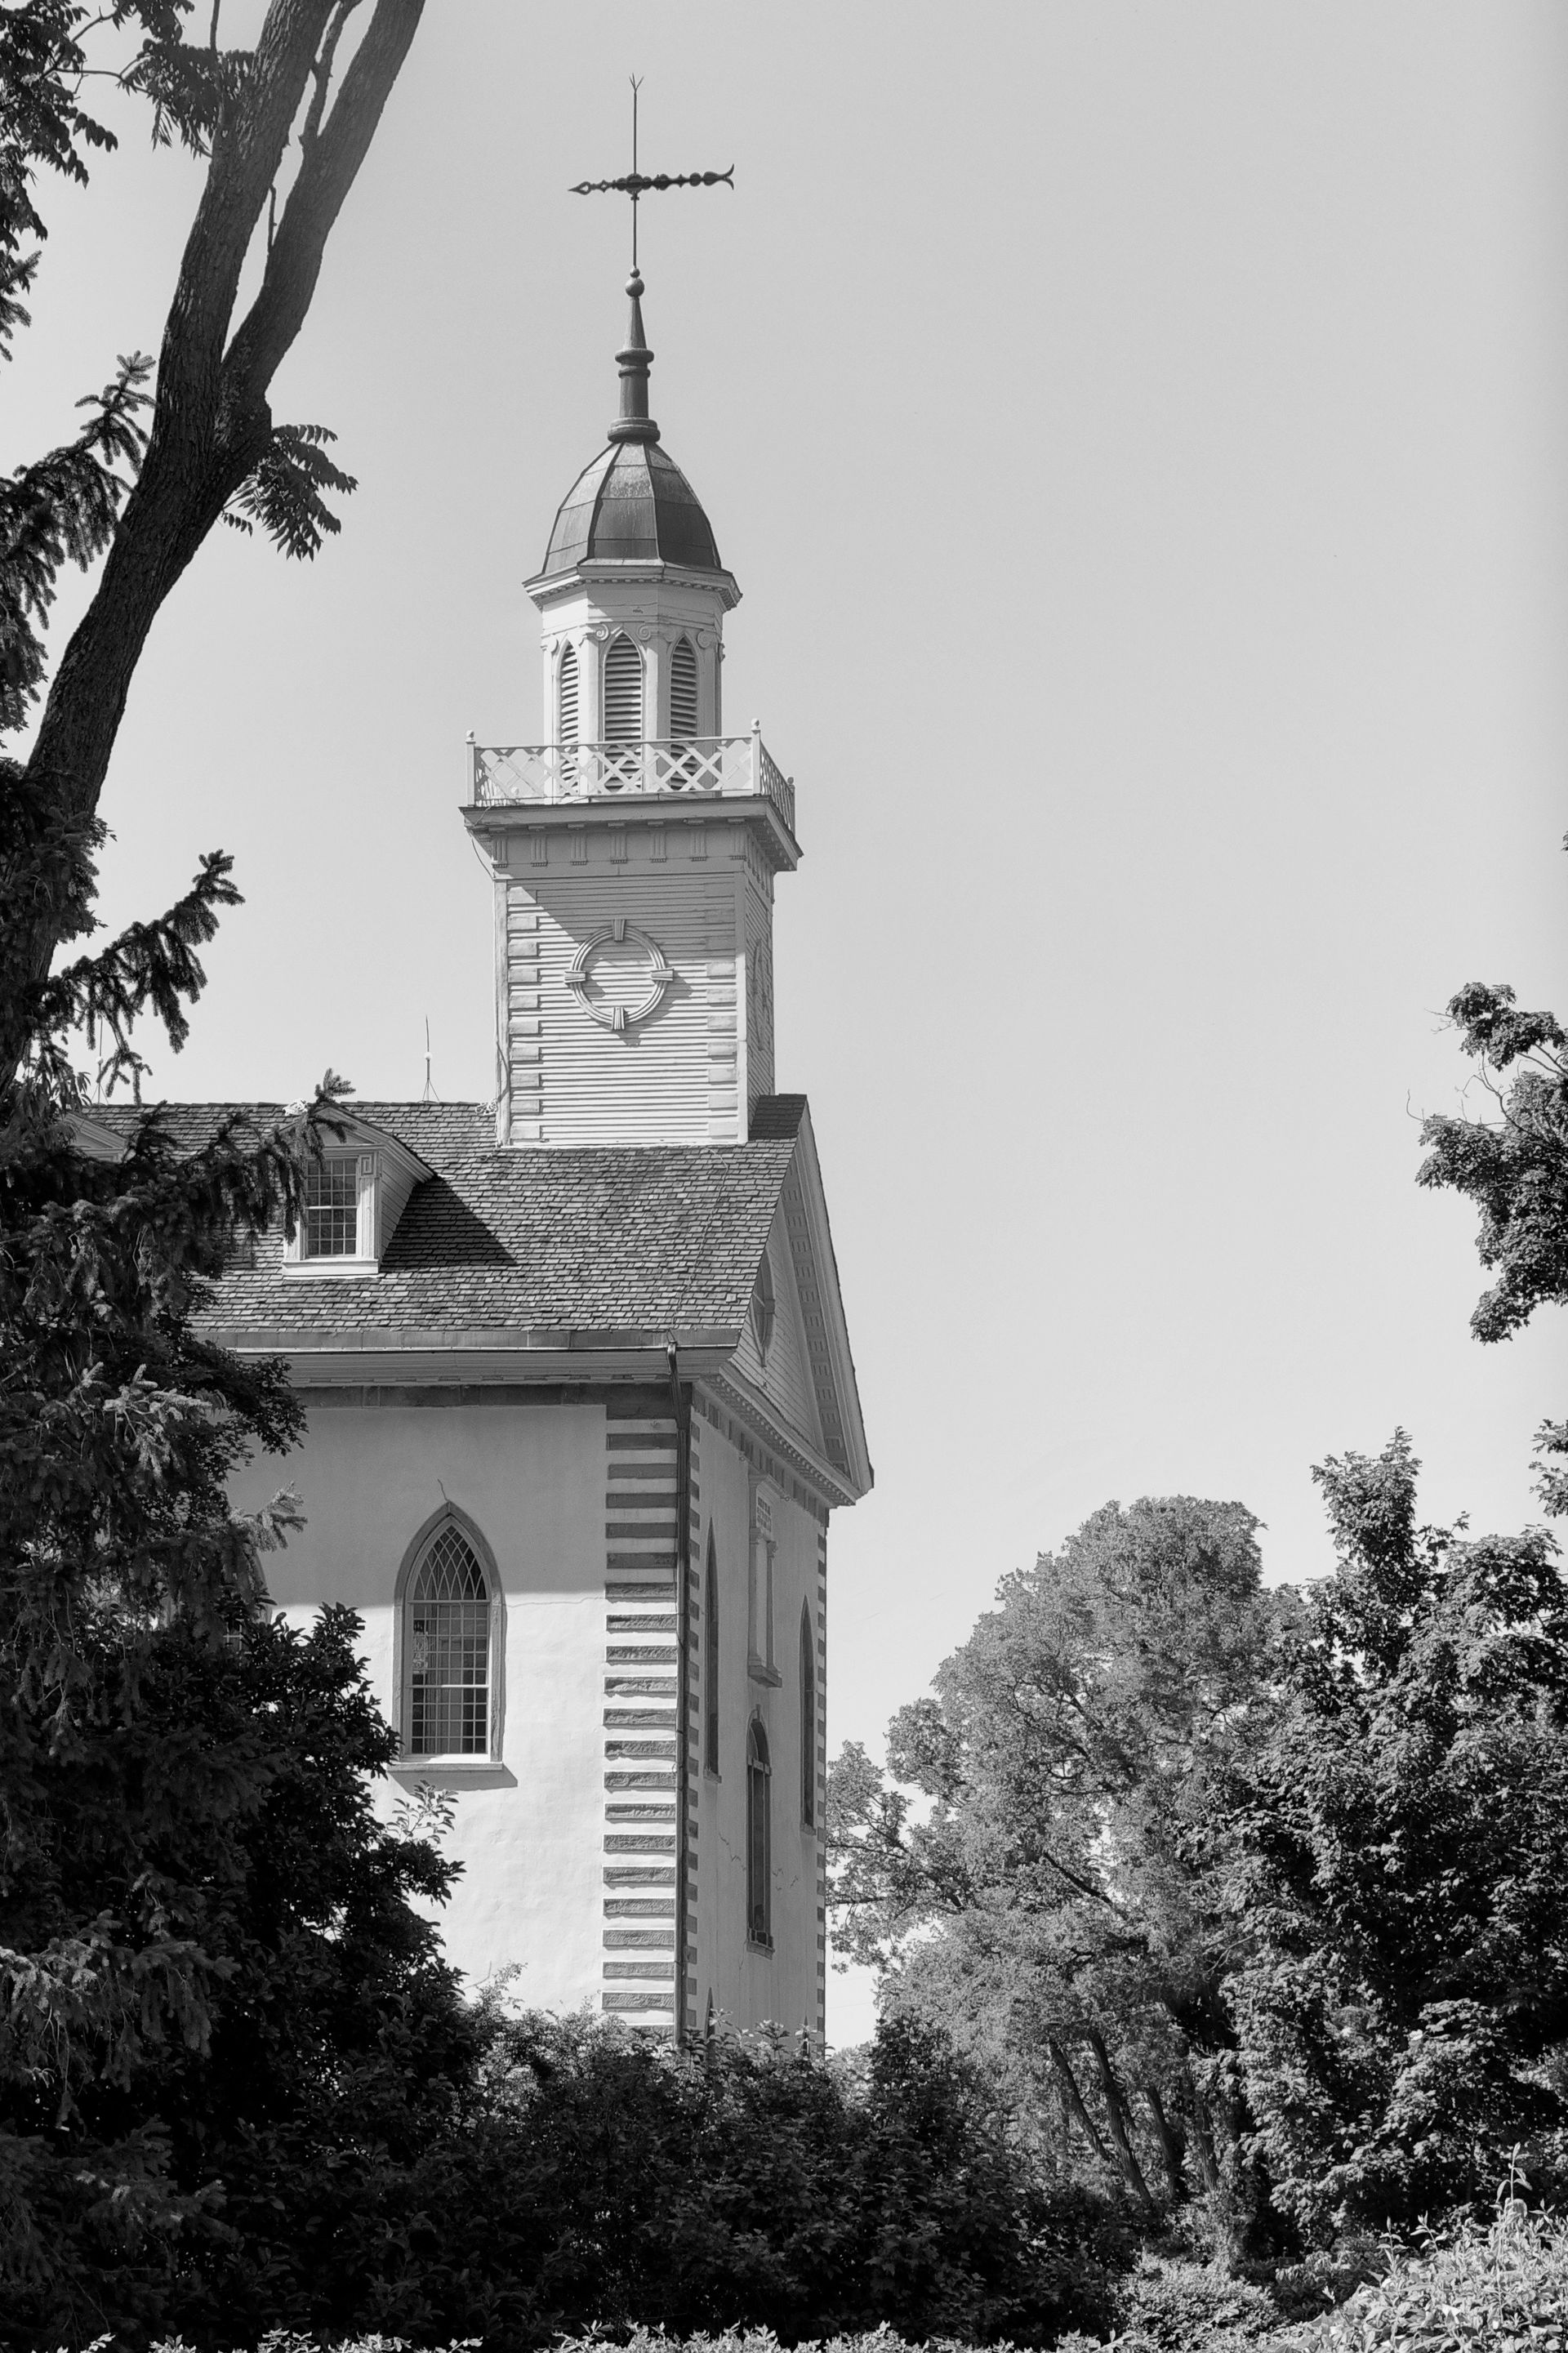 The Kirtland Temple spire in black and white, including scenery.